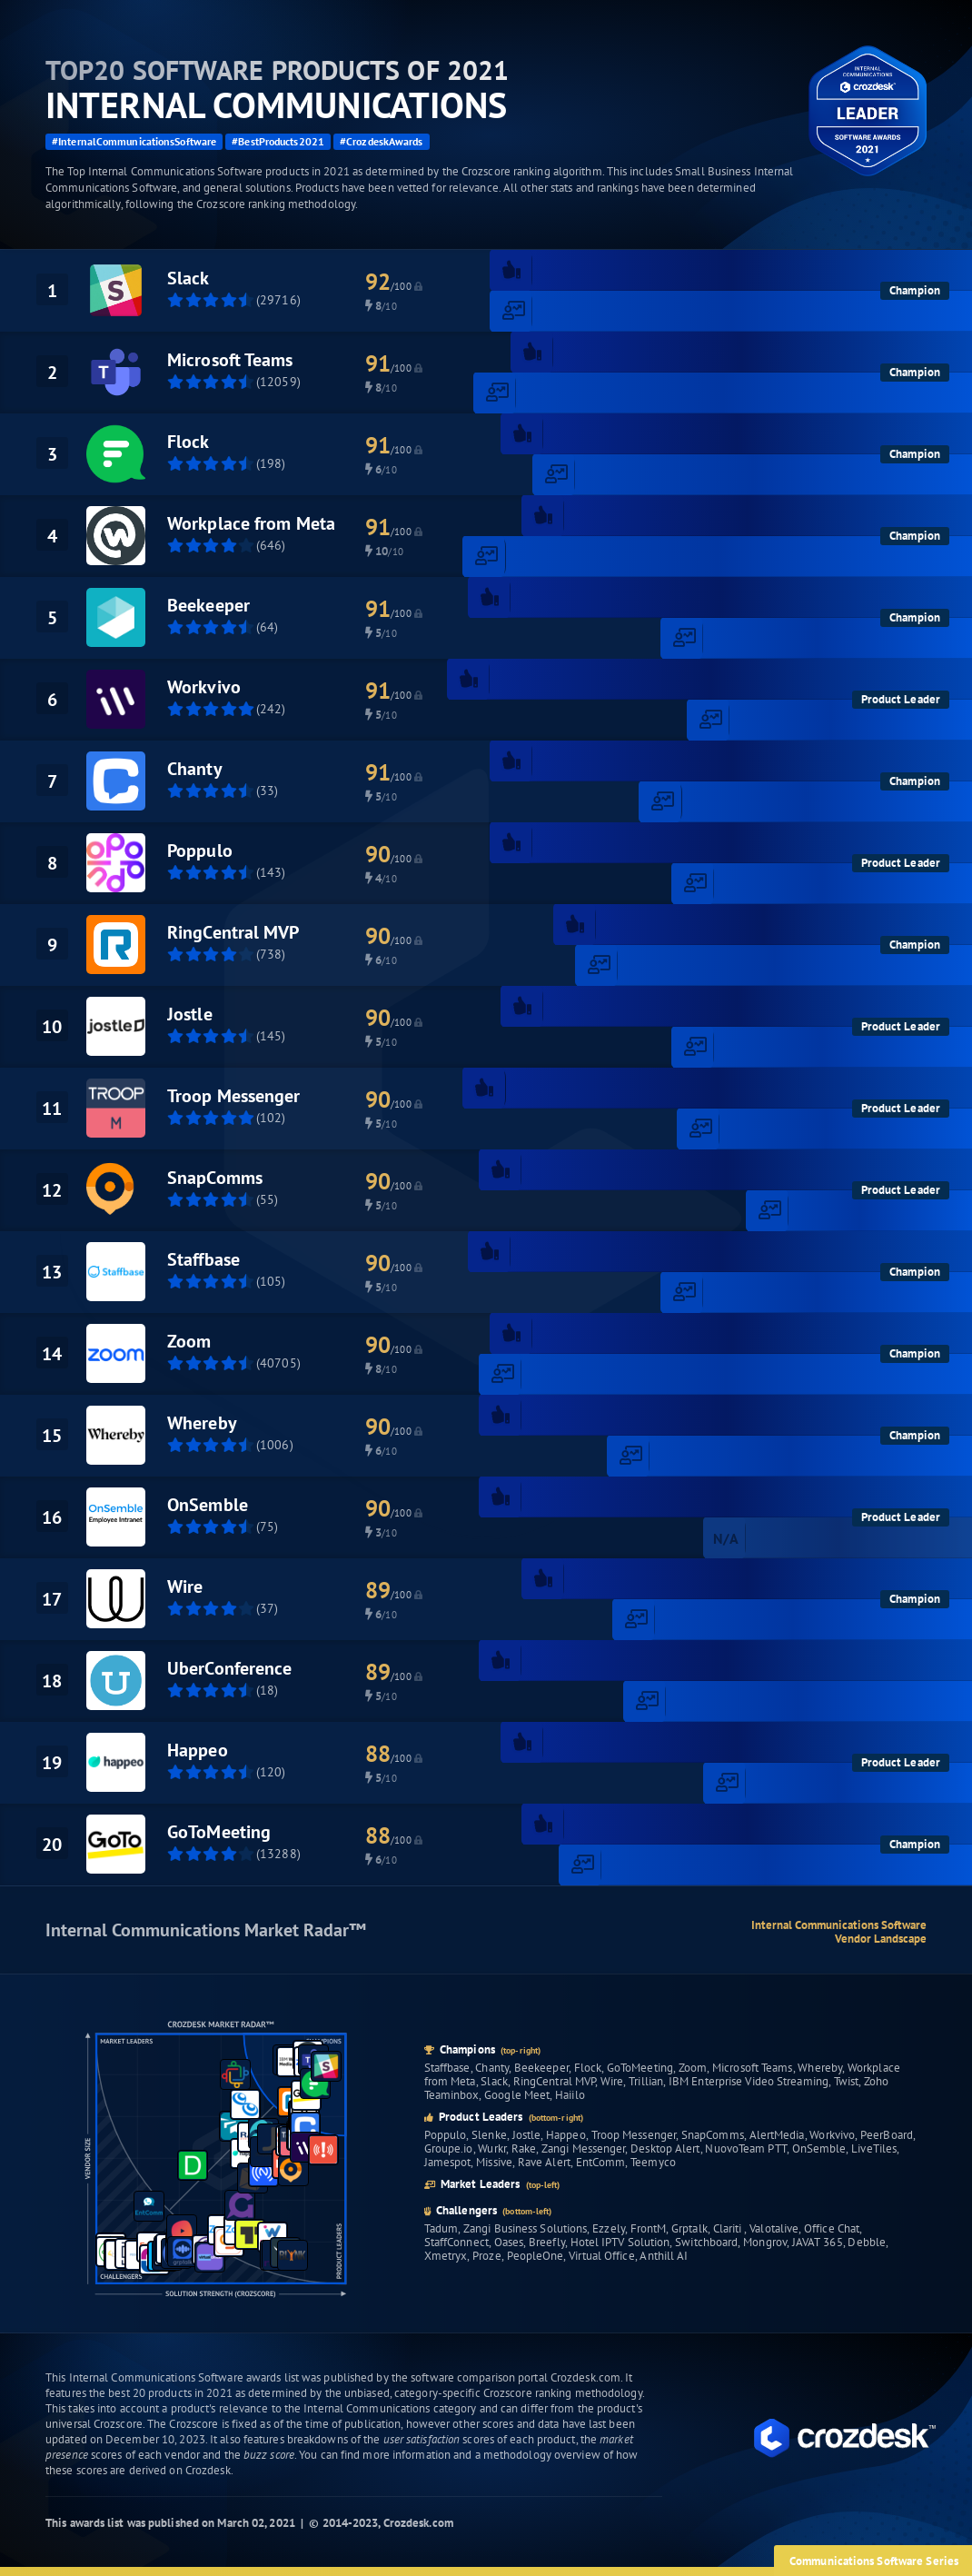 Top 20 Internal Communications Software of 2021 Infographic